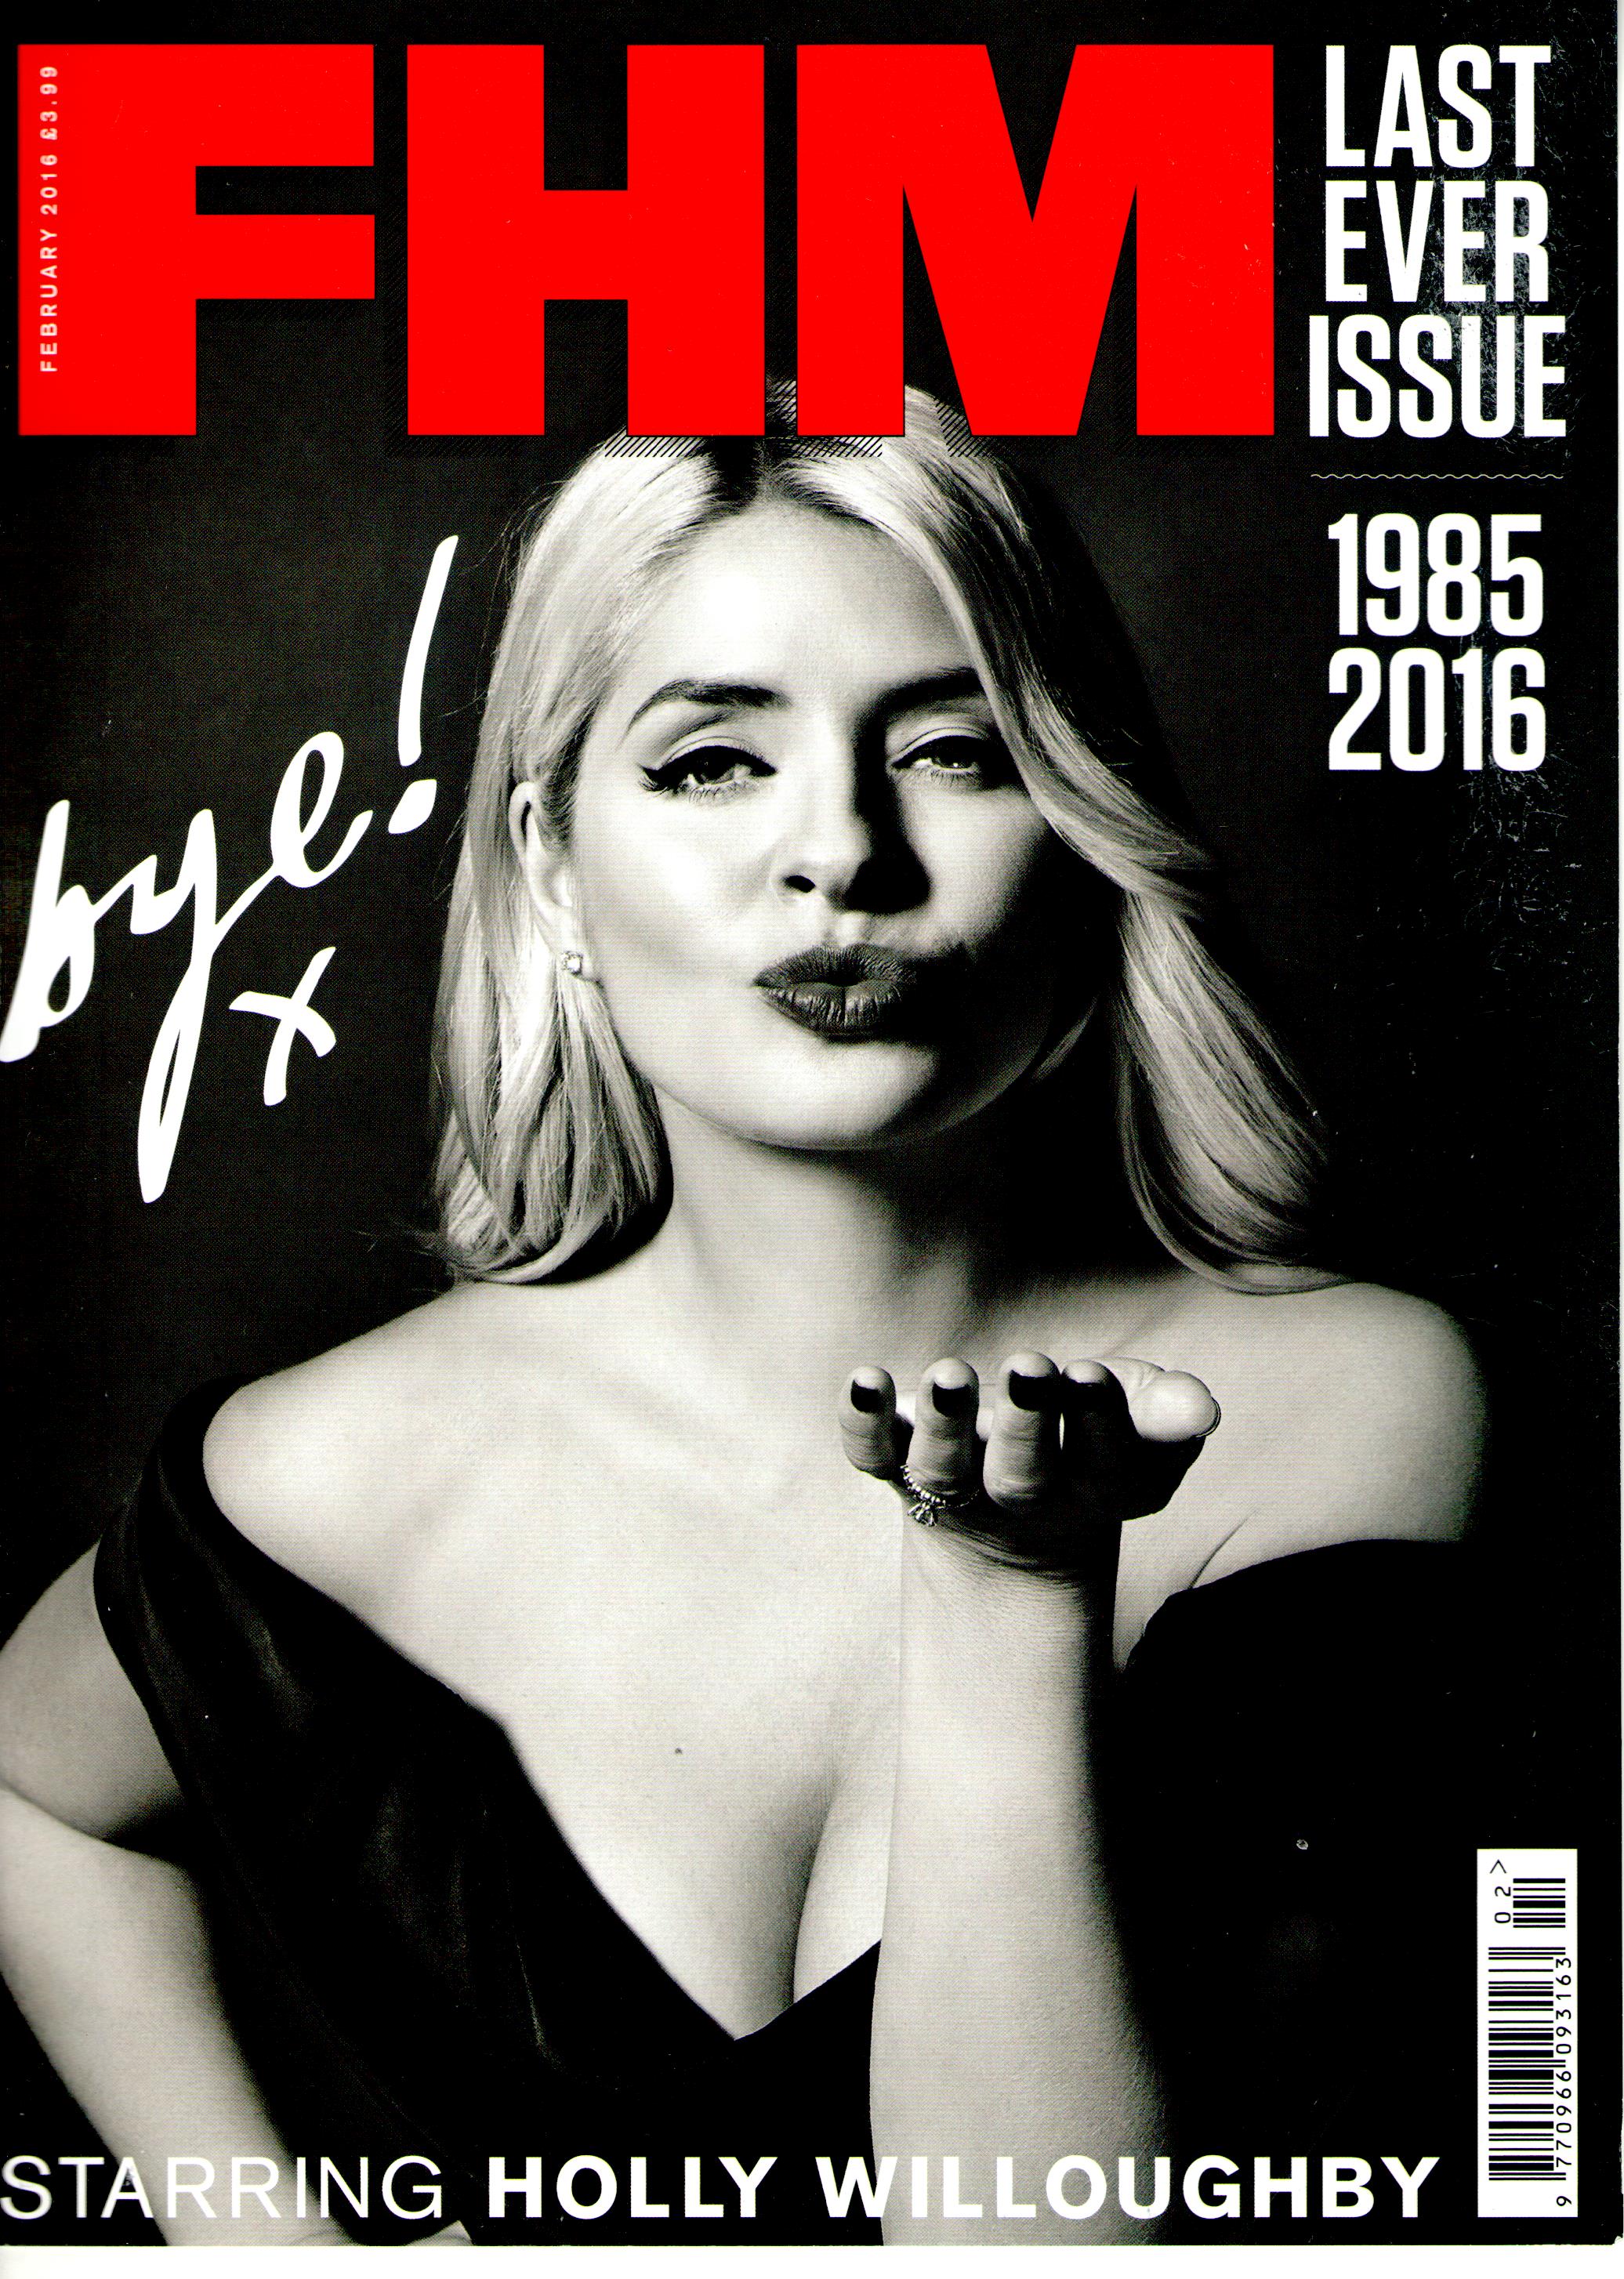 Holly Willoughby sexy FHM Magazine 2016 February 23x HQ photos 13.jpg